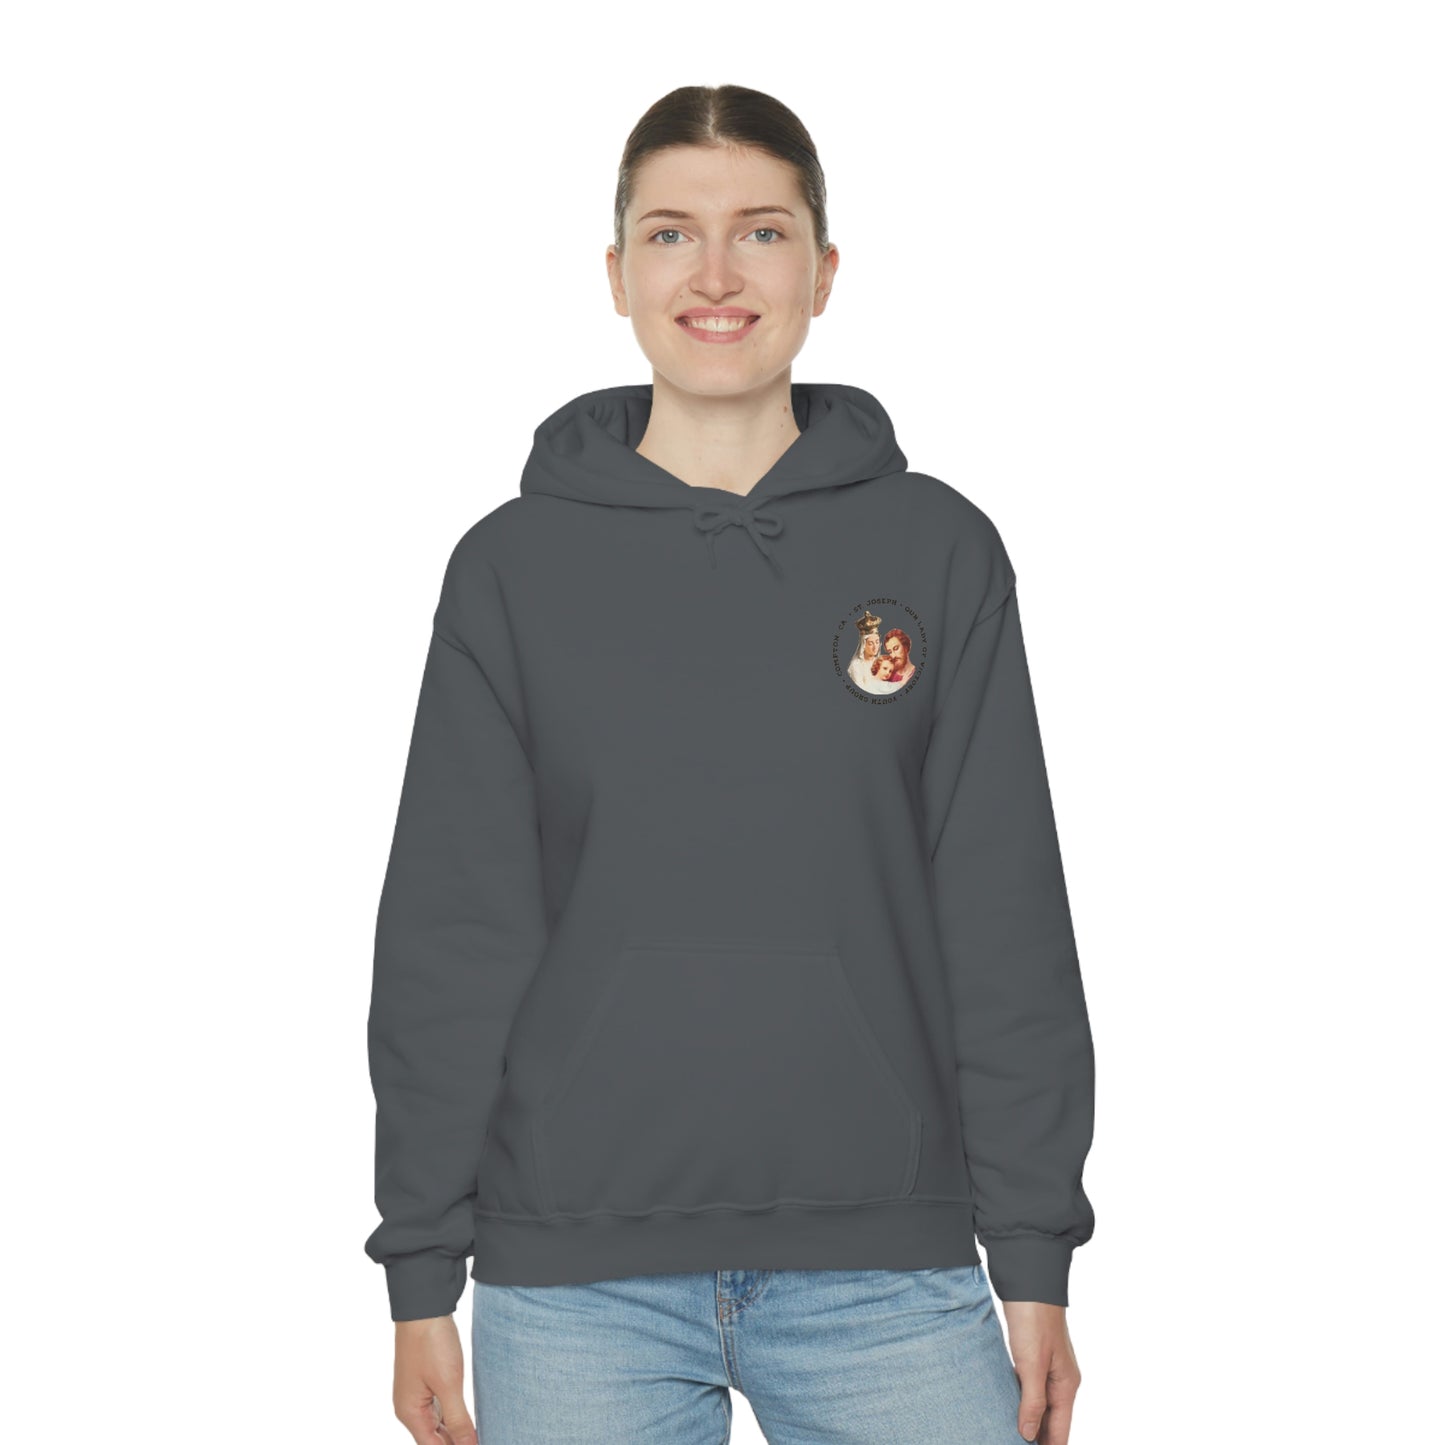 Our Lady of Victory one Sided English Unisex Heavy Blend™ Hooded Sweatshirt